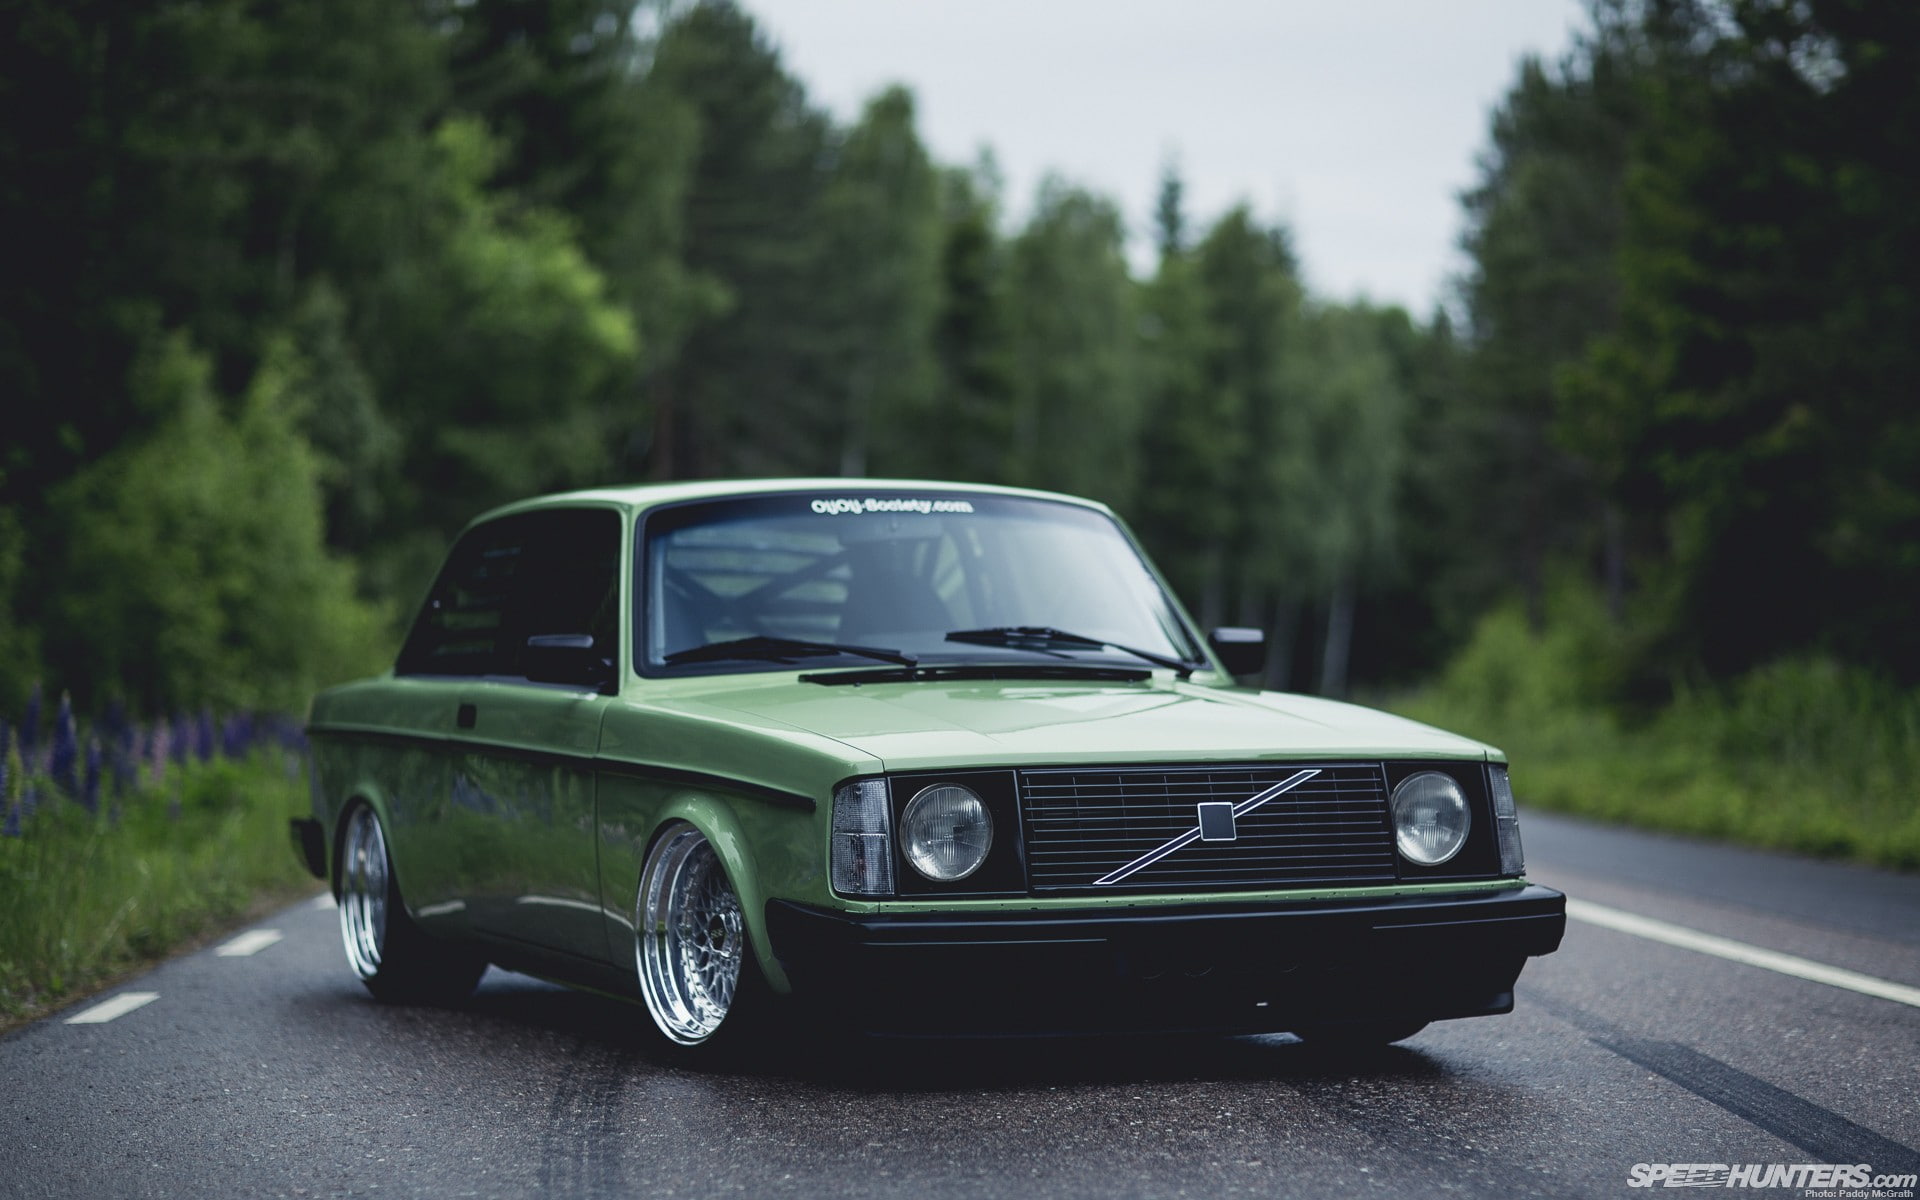 BBS, green, Stance, Volvo 240, road, car, trees